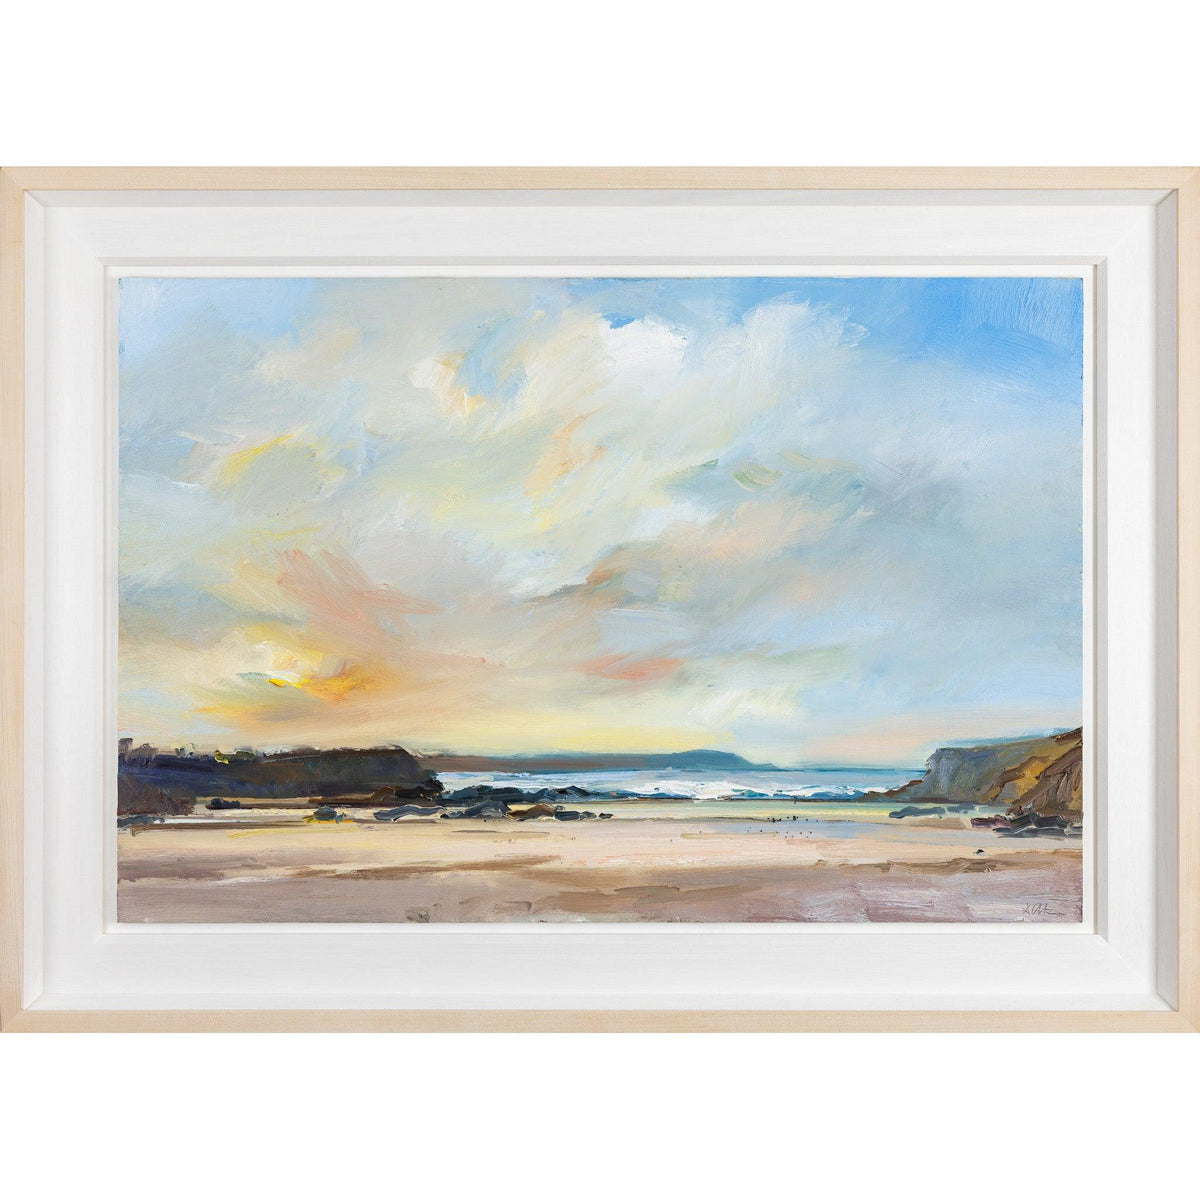 &#39;Sunset, Trevone Beach&#39; oil on board original by David Atkins, available at Padstow Gallery, Cornwall